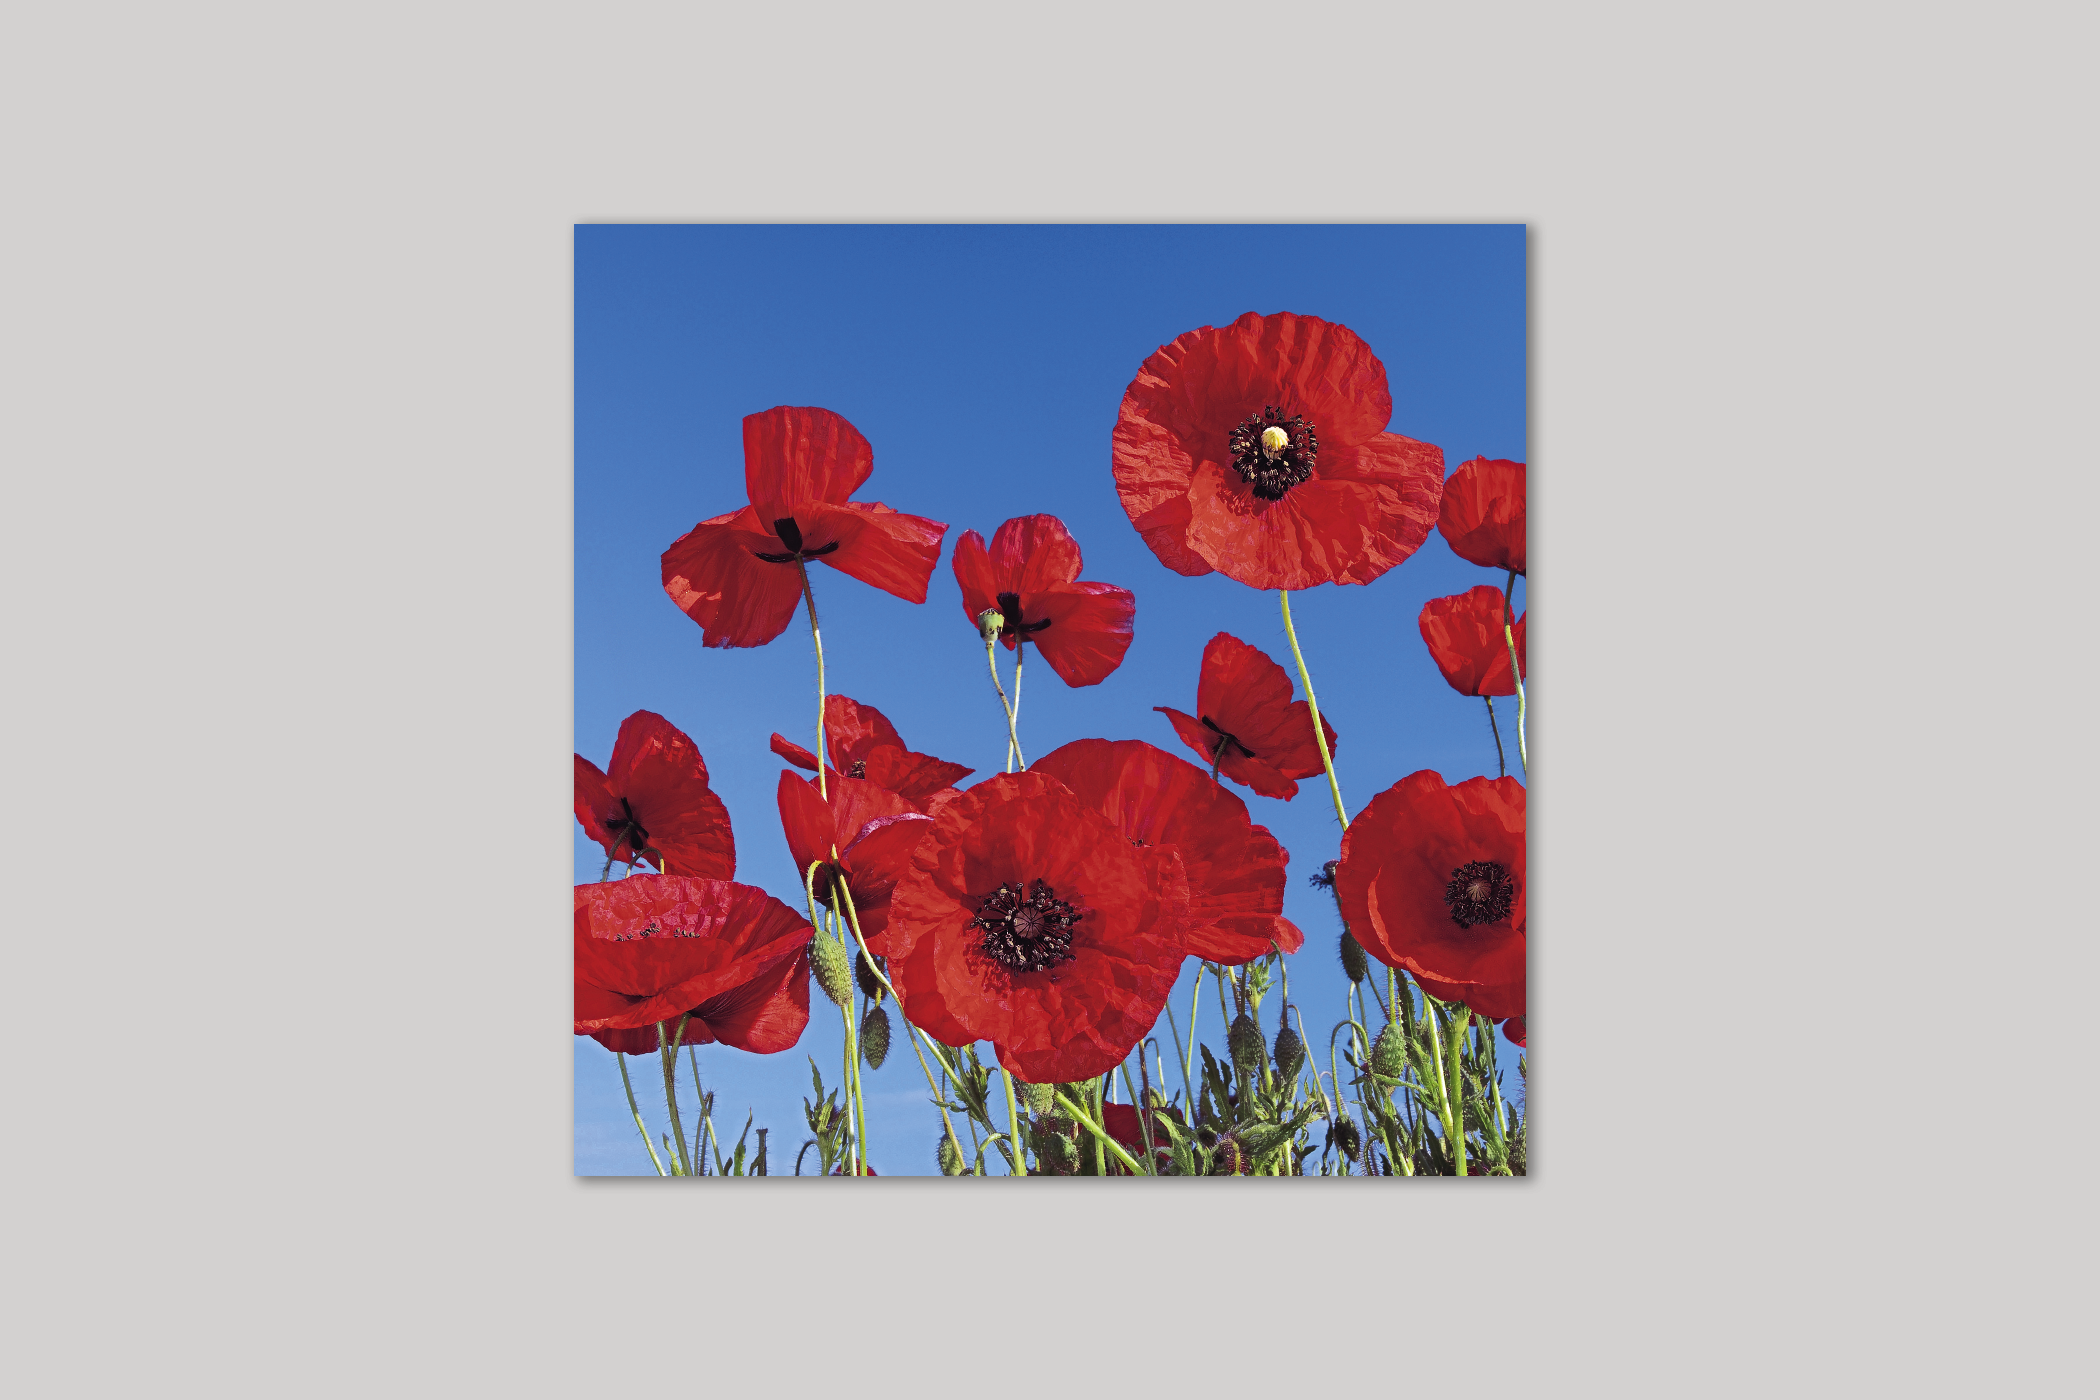 Poppies from Exposure range of photographic cards by Icon.